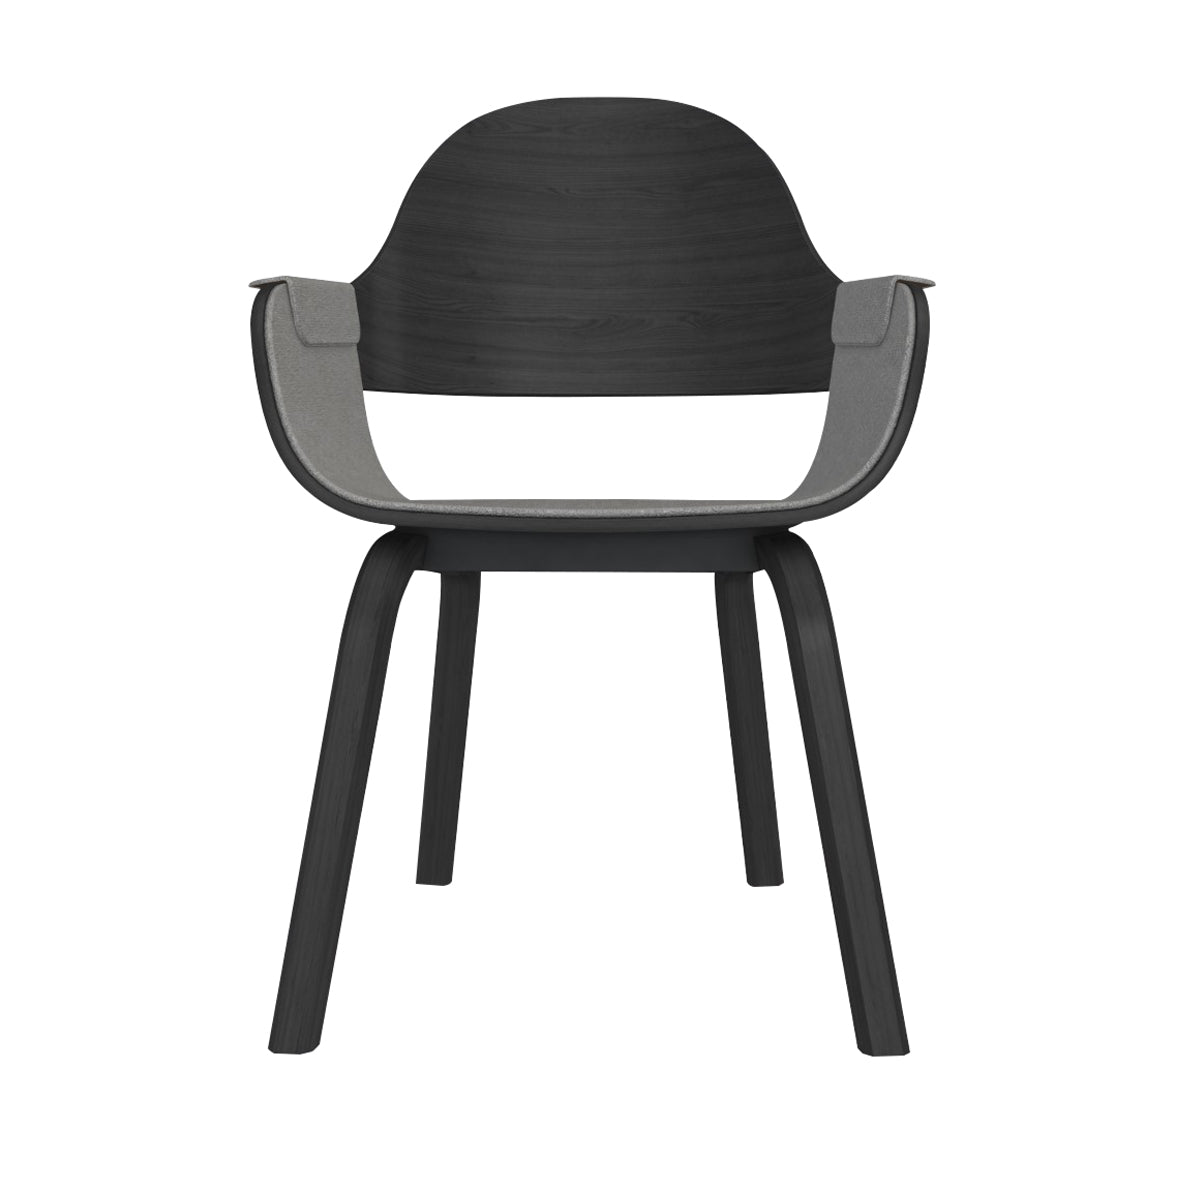 Showtime Nude Chair: Interior Seat + Armrest Upholstered + Ash Stained Black